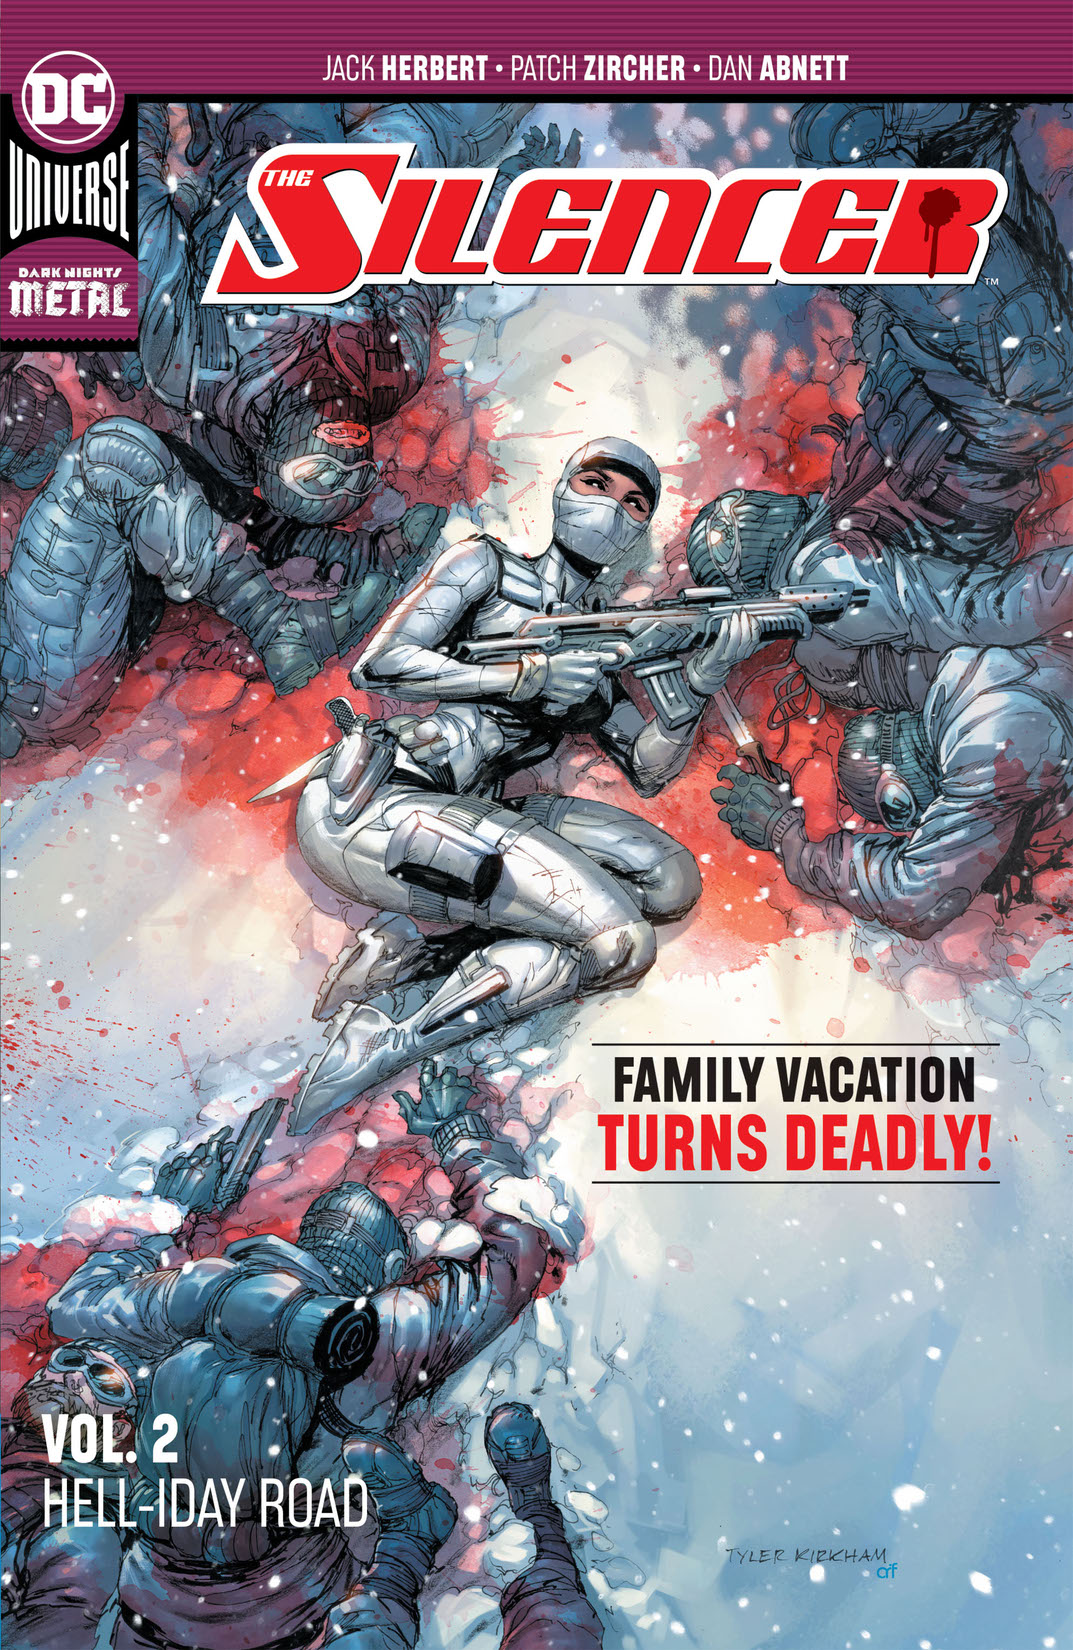 The Silencer Vol. 2: Hell-iday Road preview images